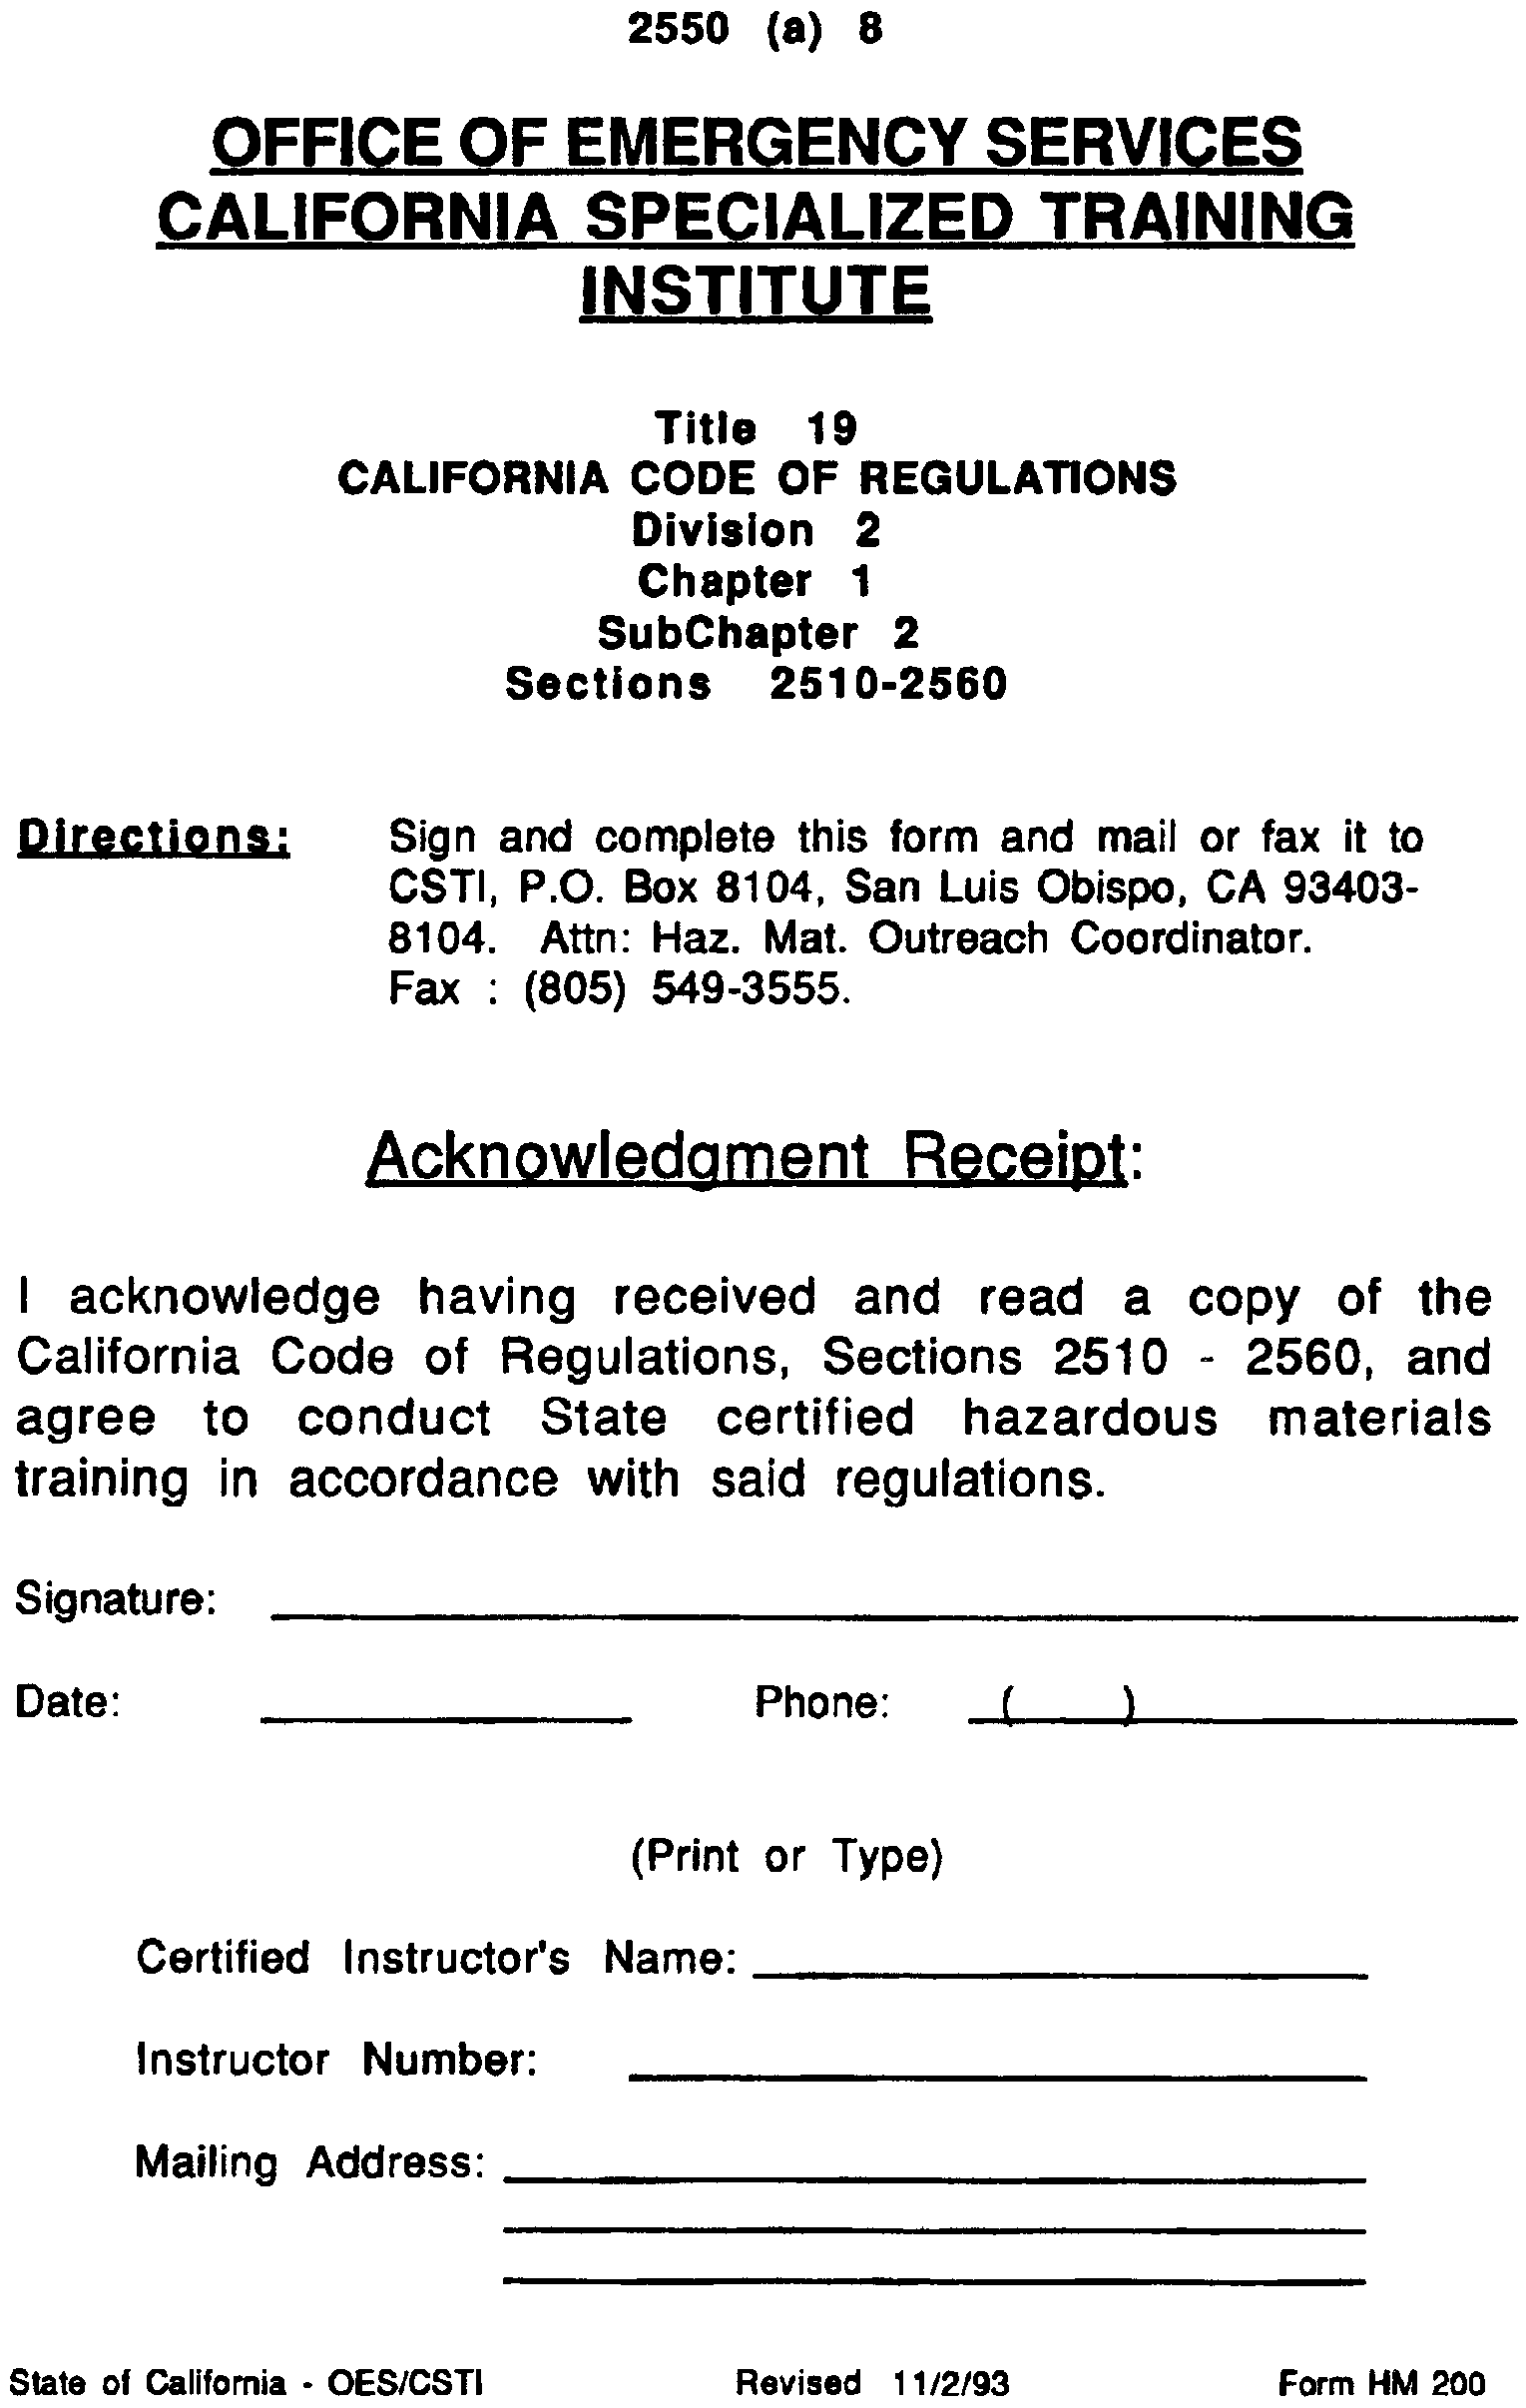 Image 20 within § 2550. Administrative Forms.